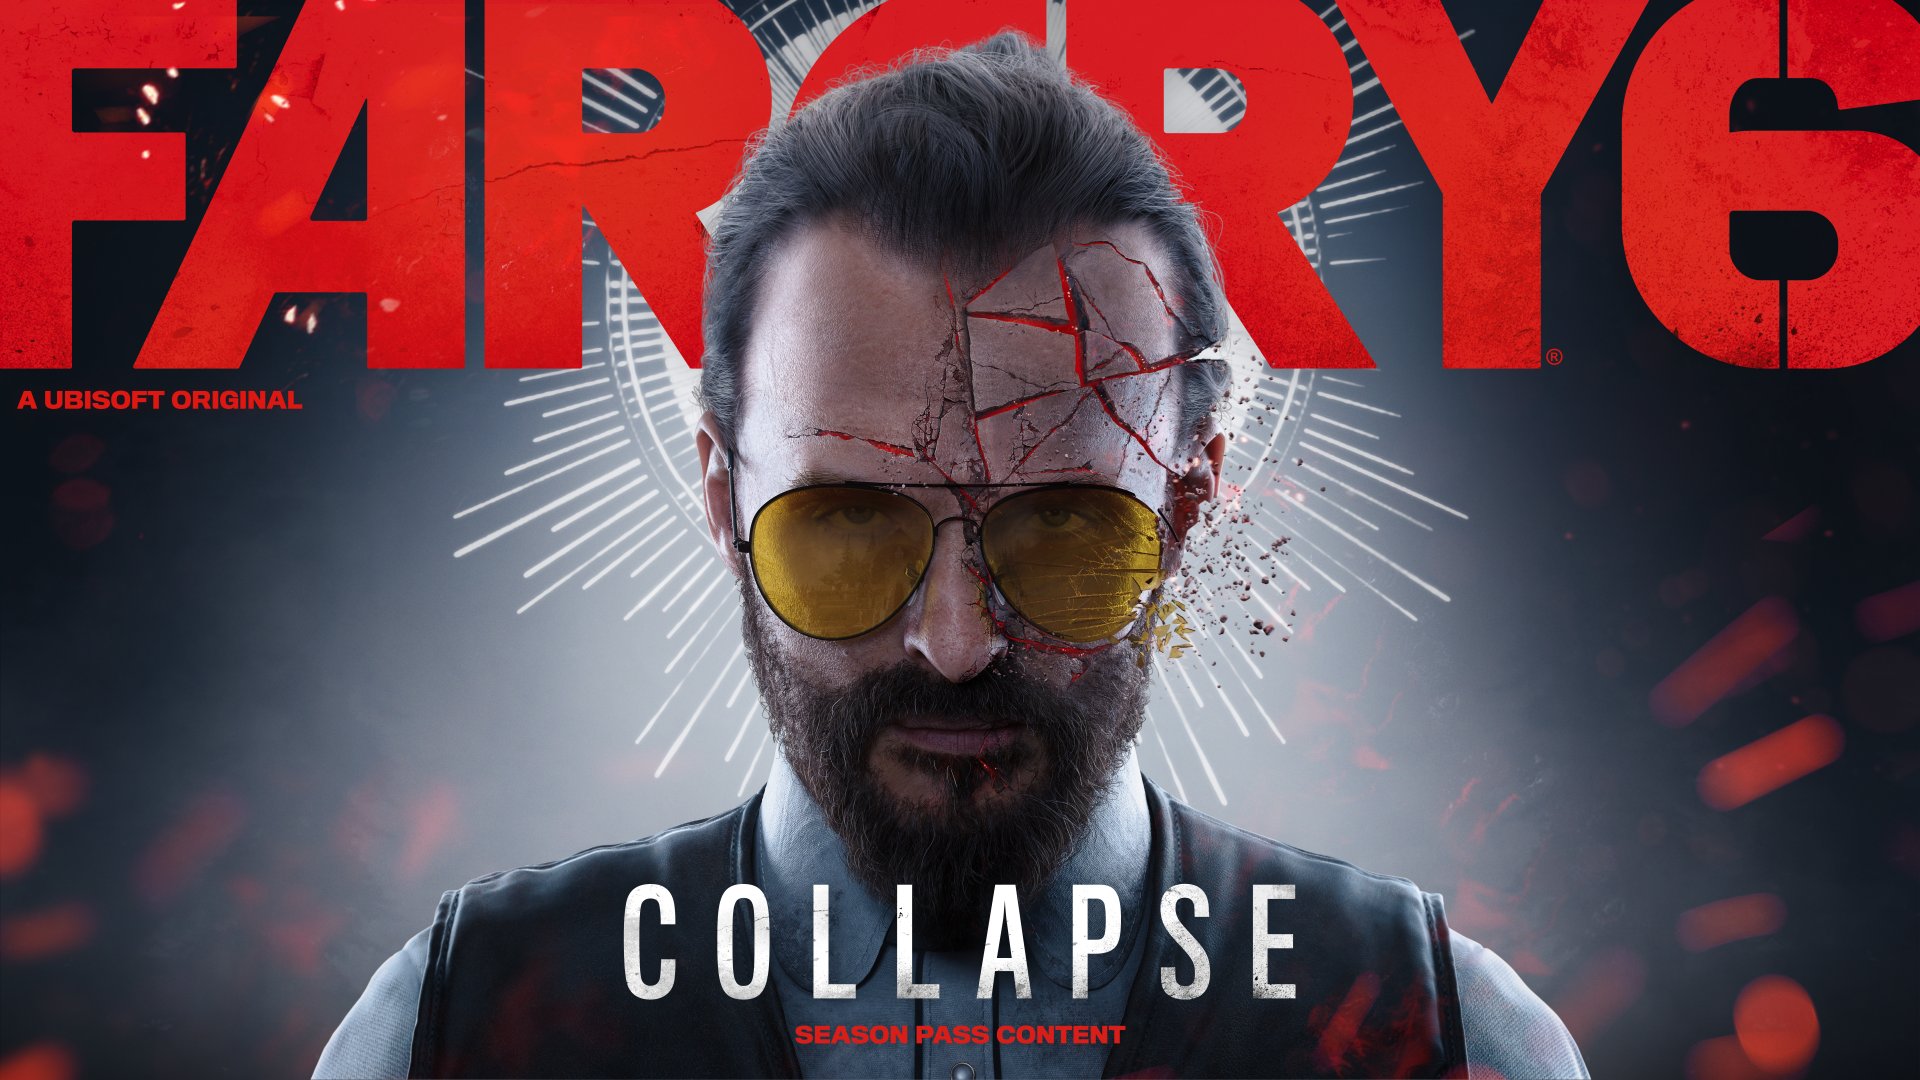 Tap into the Mind of a Cult Leader in Far Cry 6’s Joseph: Collapse DLC